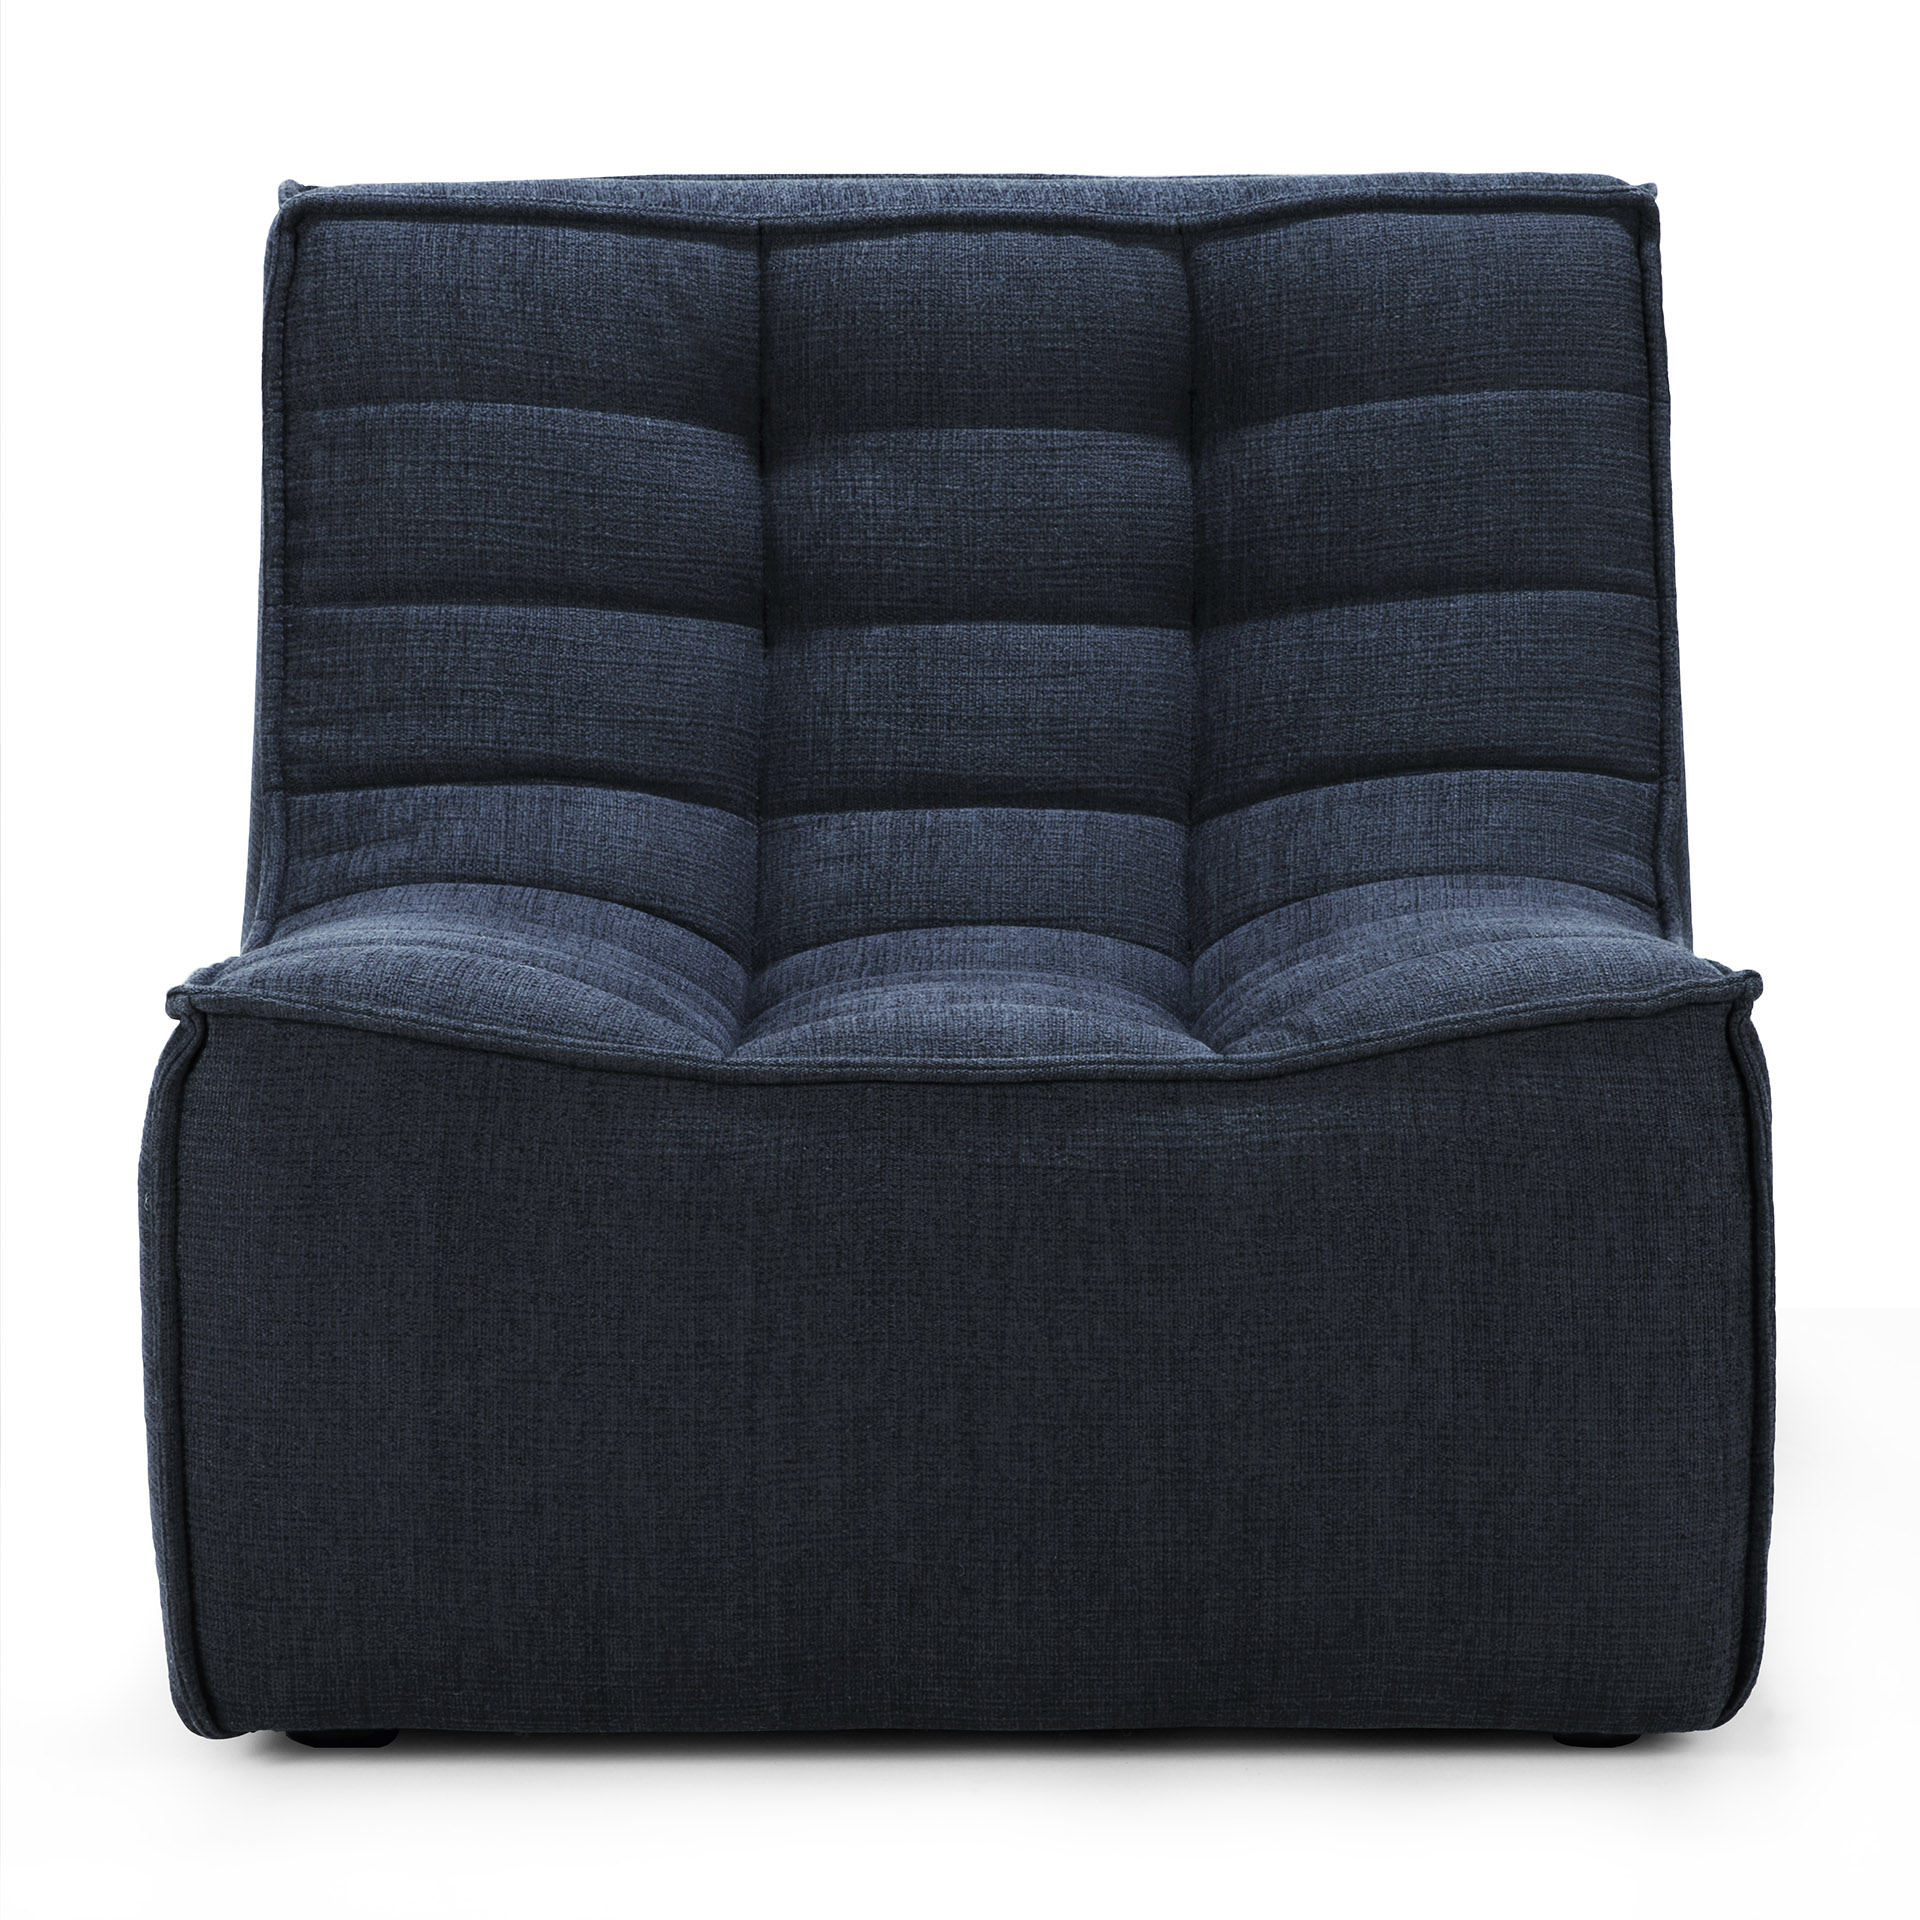 20222_N701_Sofa_1_seater_graphite_front_cut_web-1